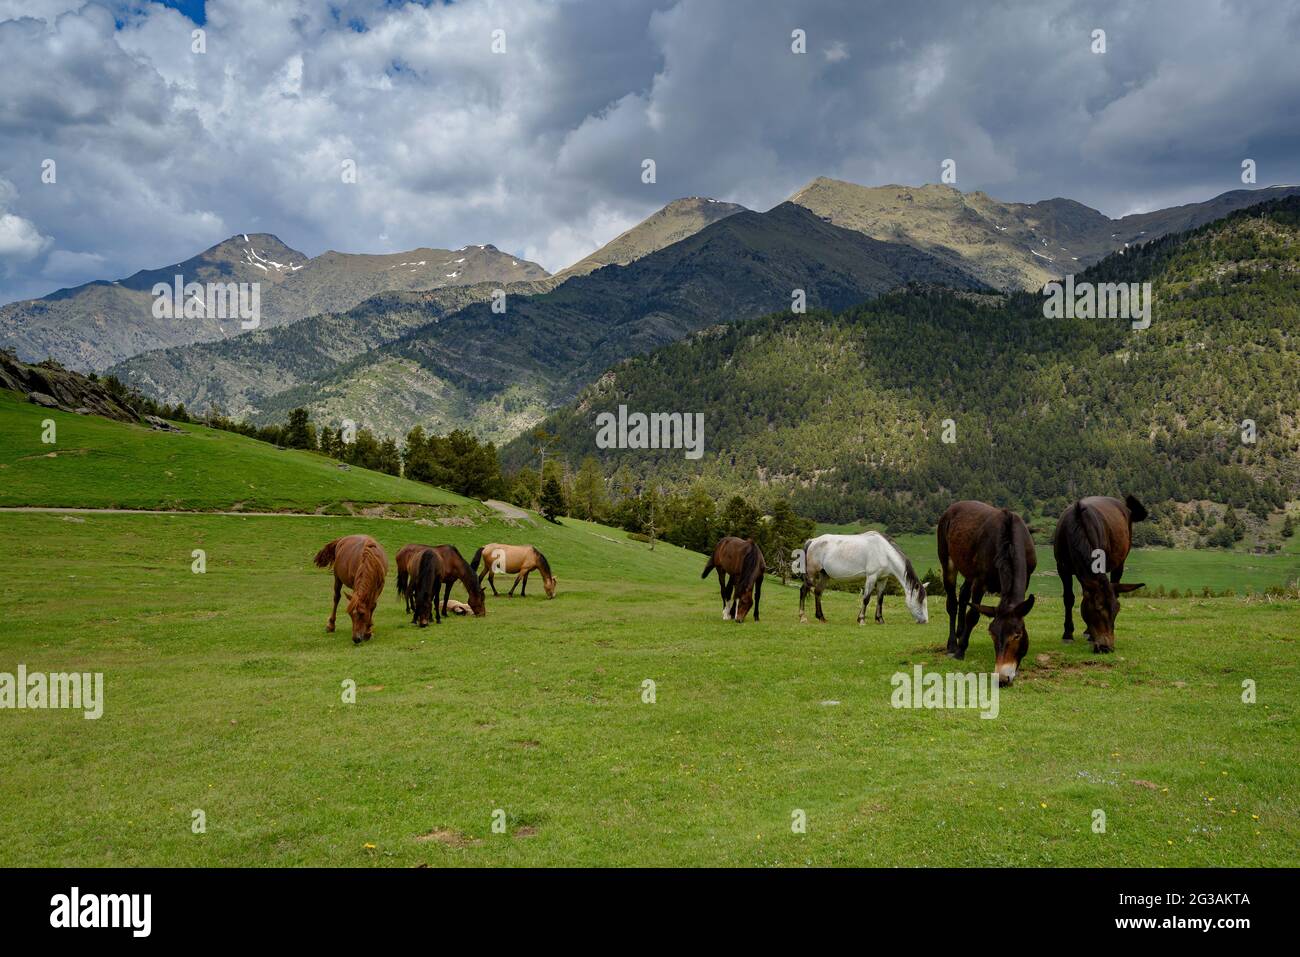 Horses and donkeys in the alpine meadows of the Tor mountain on a cloudy spring day (Pallars Sobirà, Lleida, Catalonia, Spain, Pyrenees) Stock Photo